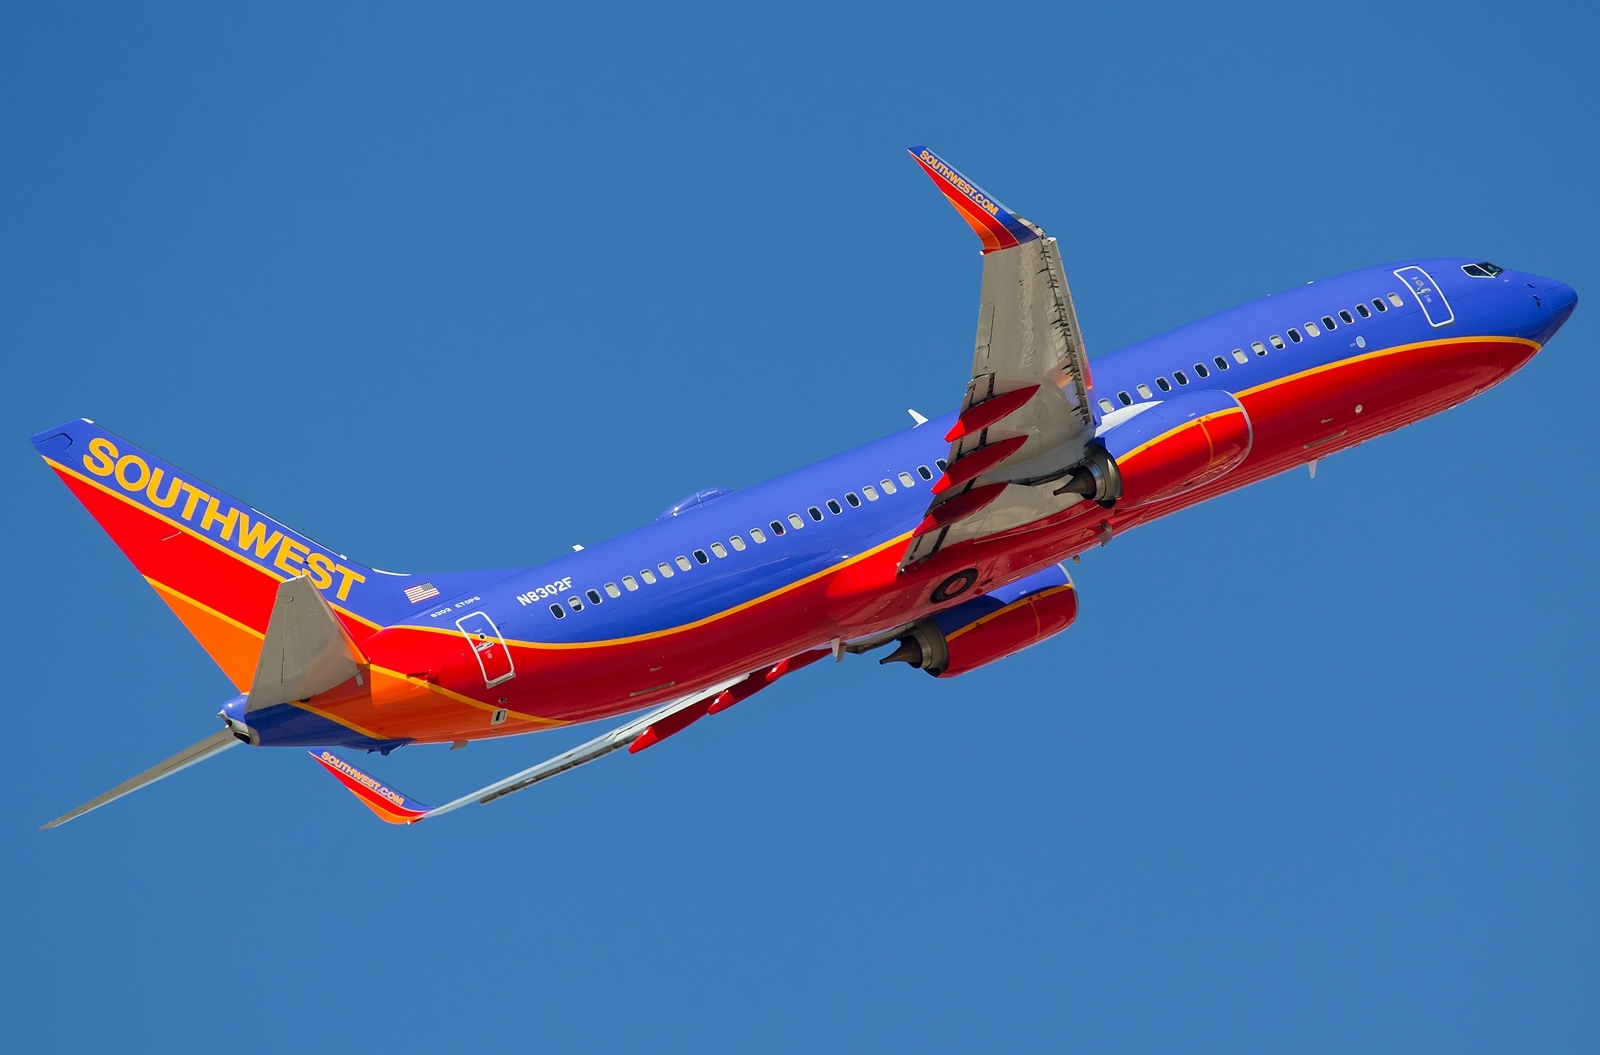 southwest wallpaper,airline,air travel,airplane,aviation,aircraft